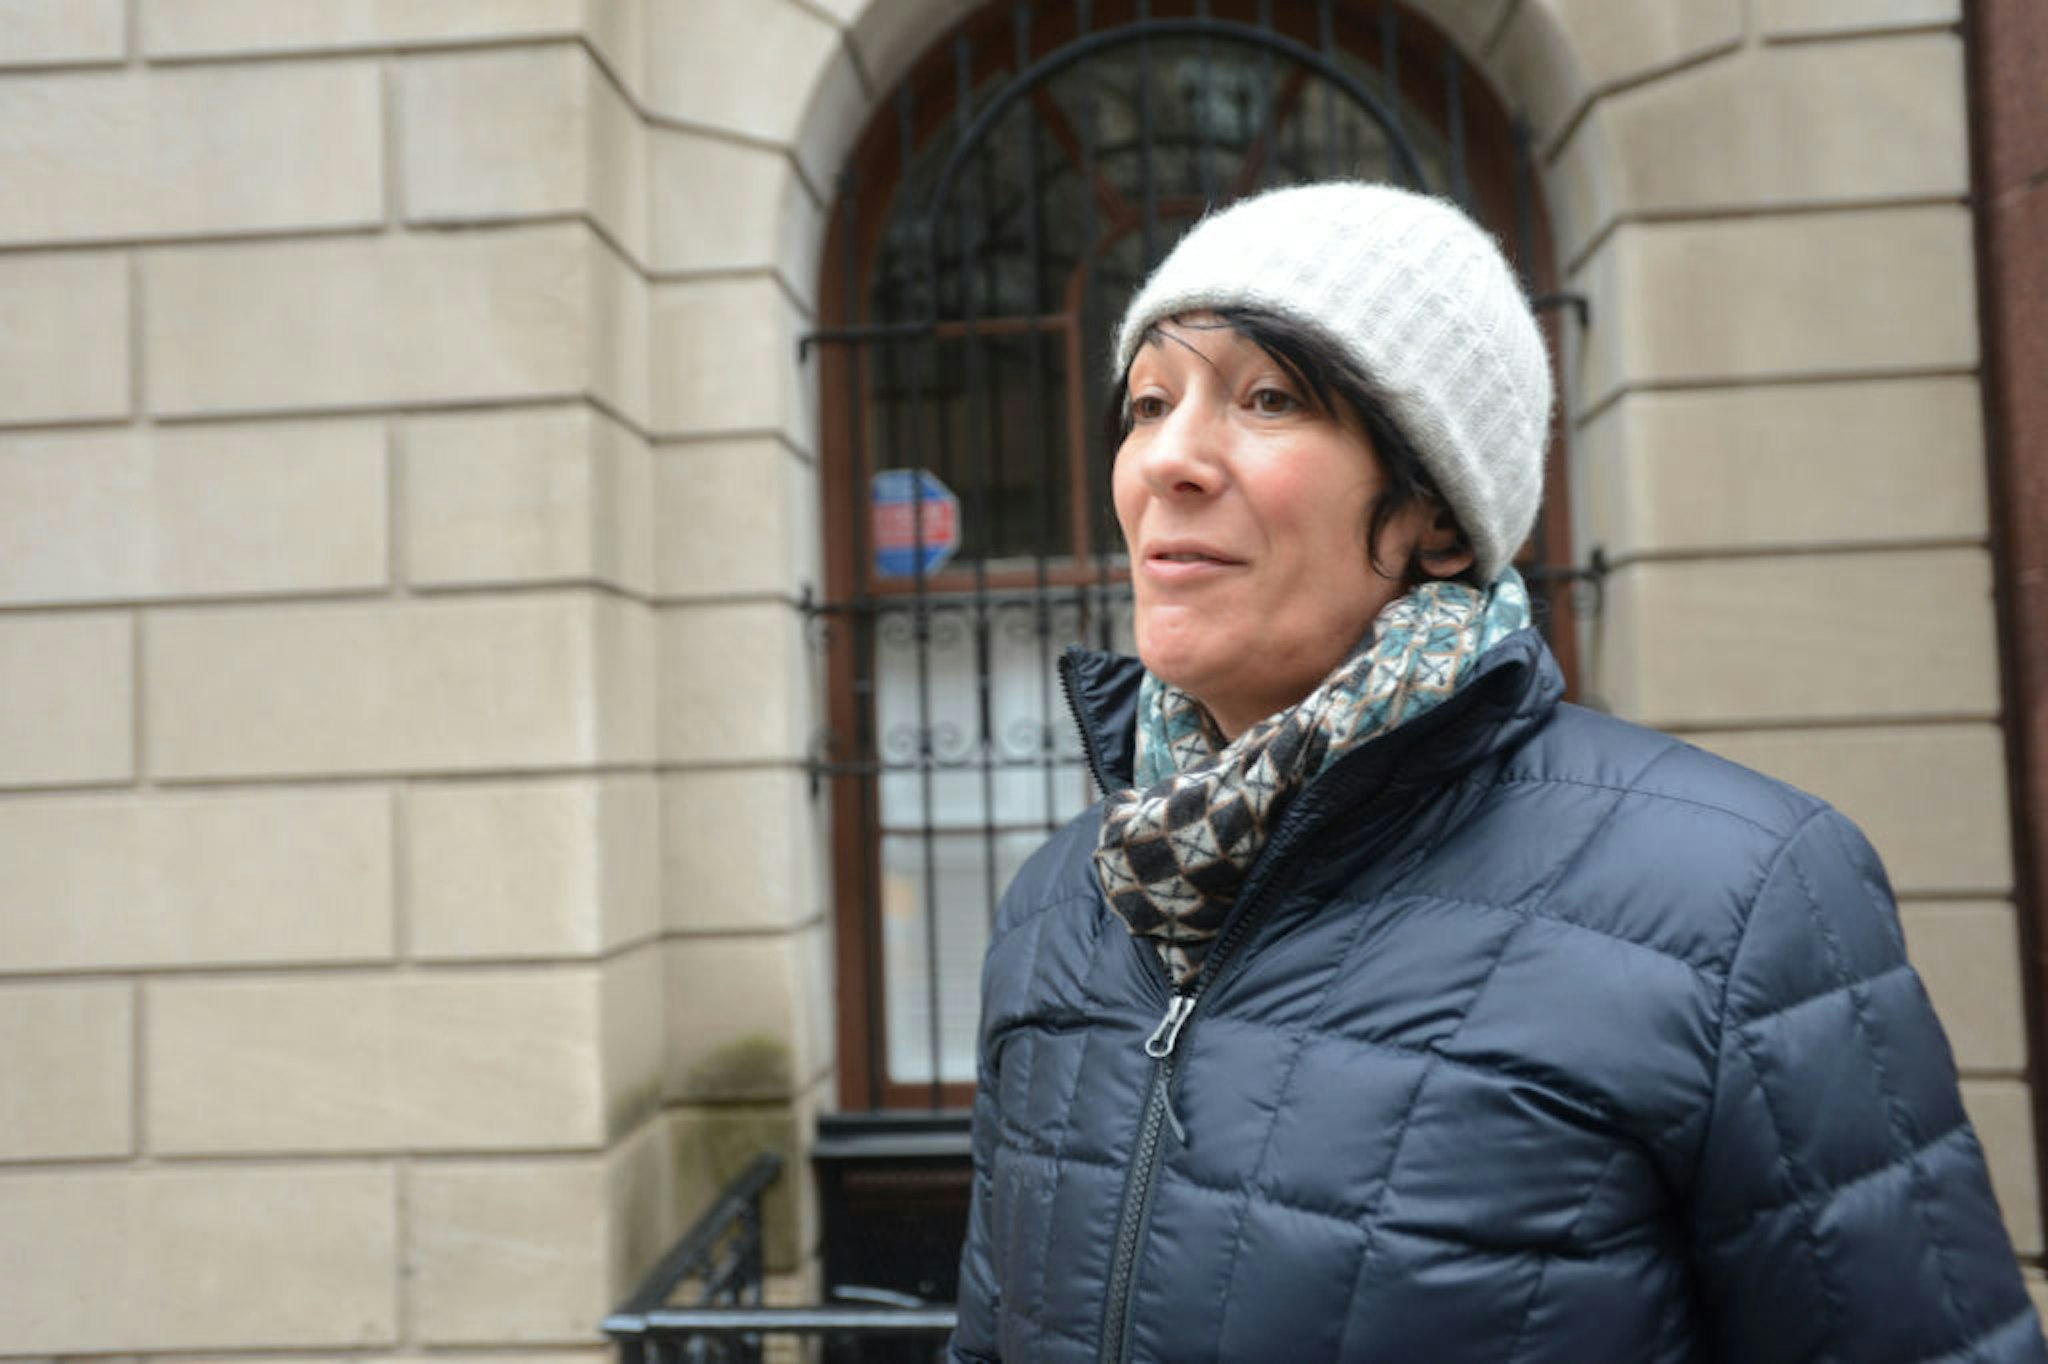 Ghislaine Maxwell, after walking out the side door of her East 65th Street townhouse in Manhattan on Sunday, January 4, 2015.